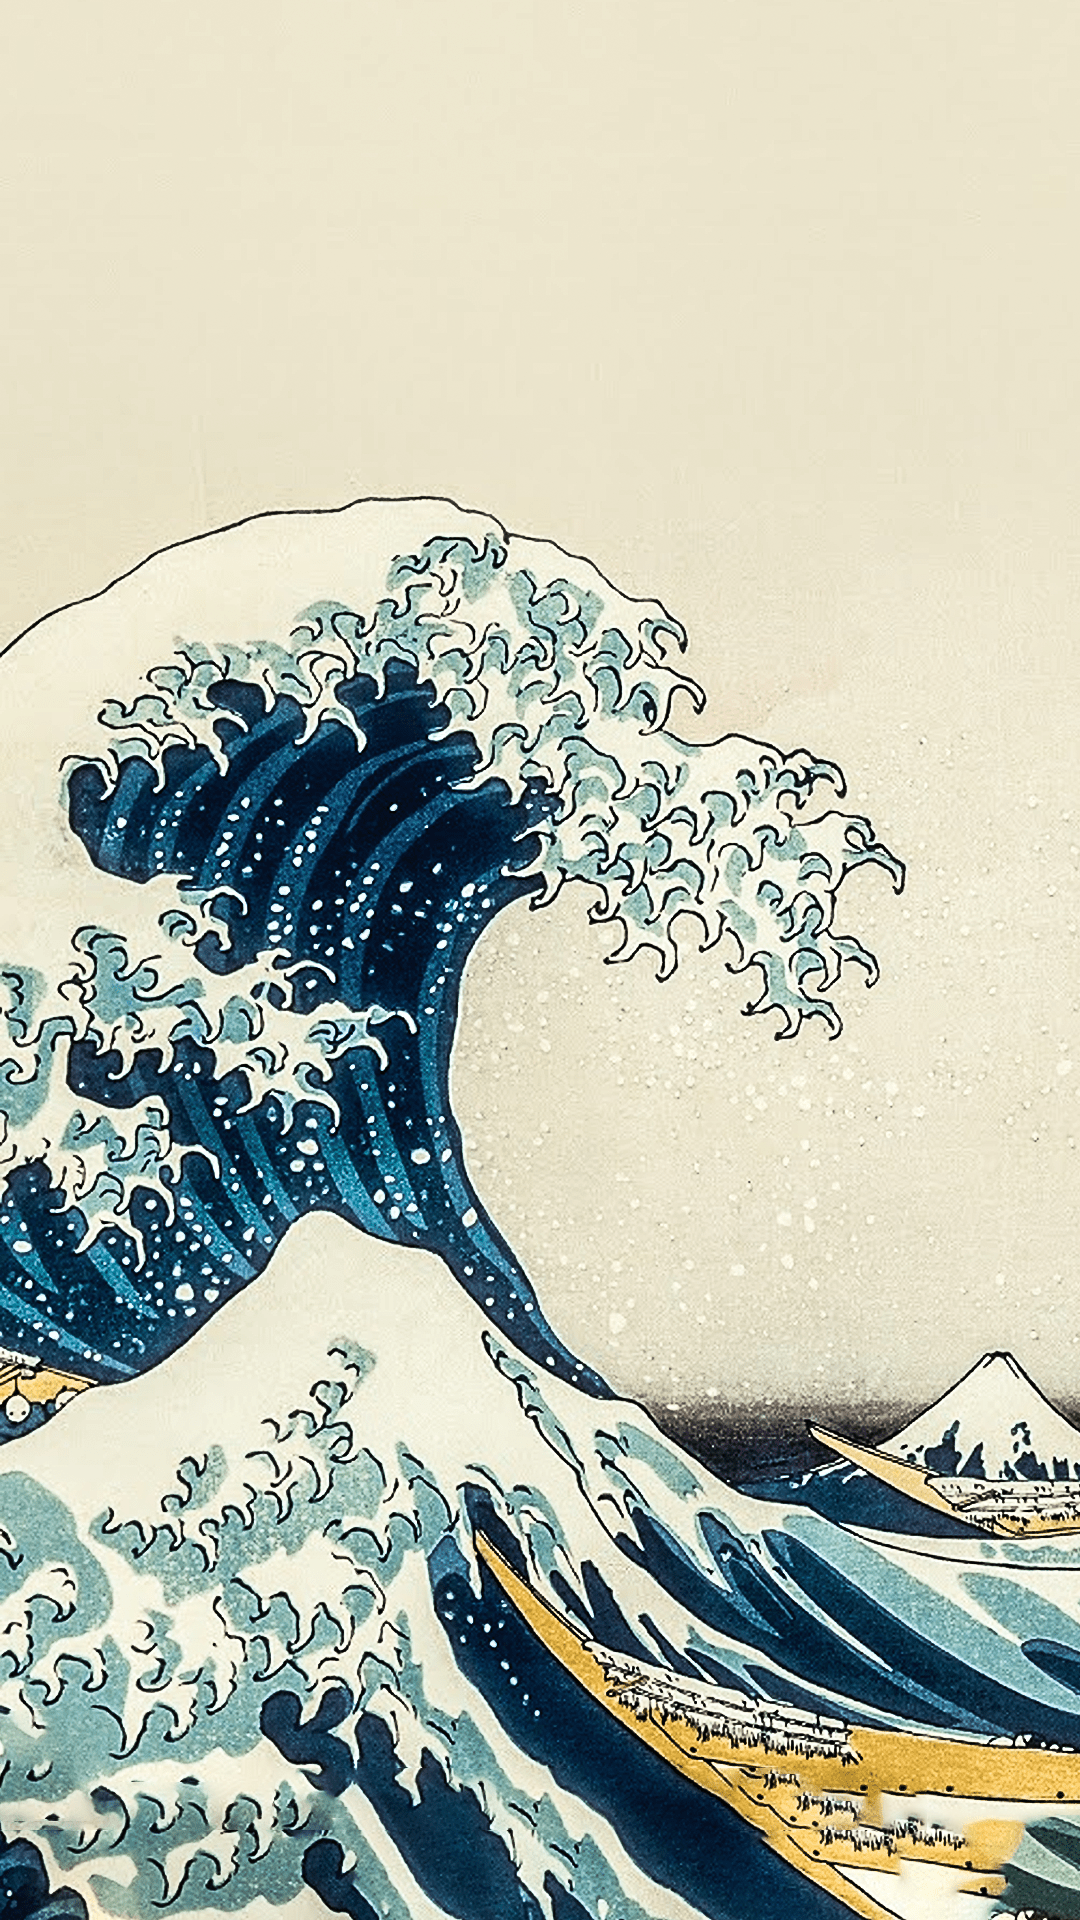 A painting of the great wave off kanagawa - The Great Wave off Kanagawa